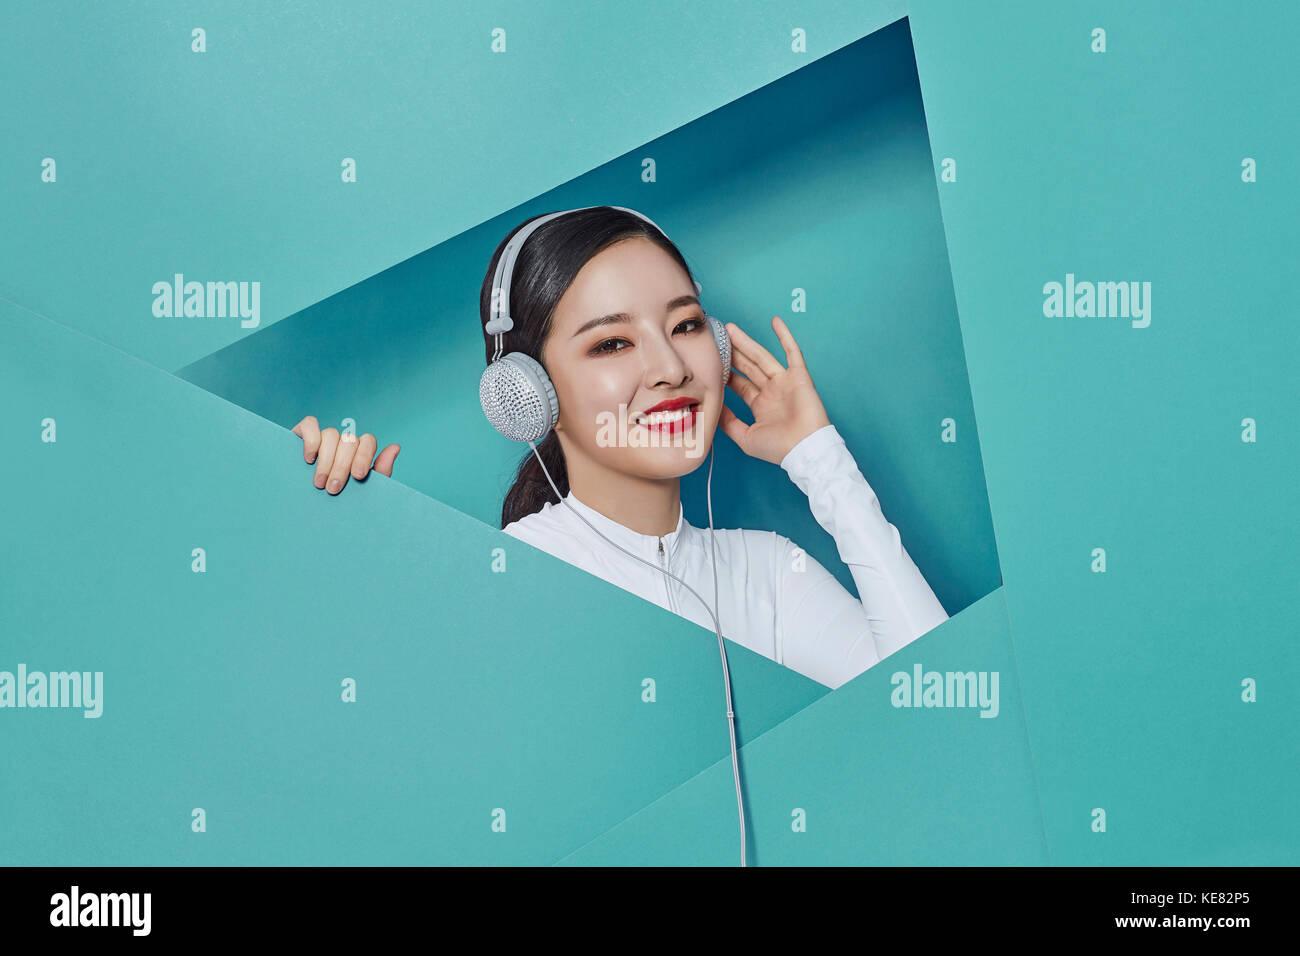 Portrait of young smiling woman listening to music Banque D'Images